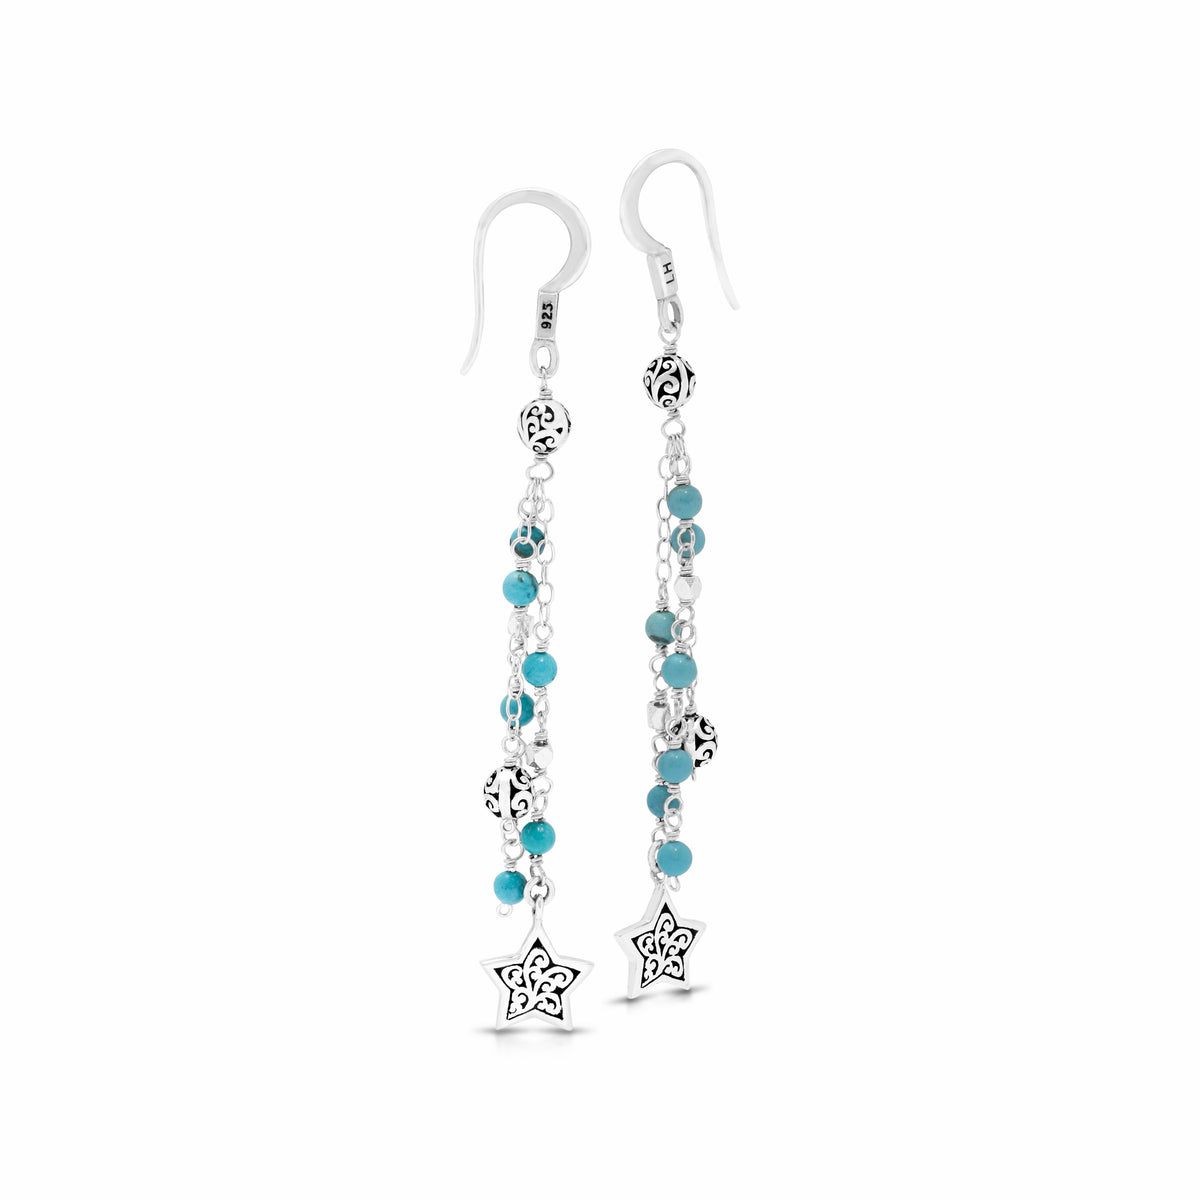 Blue Turquoise and LH Scroll Beads with Star Triple Strand Chandelier Earrings